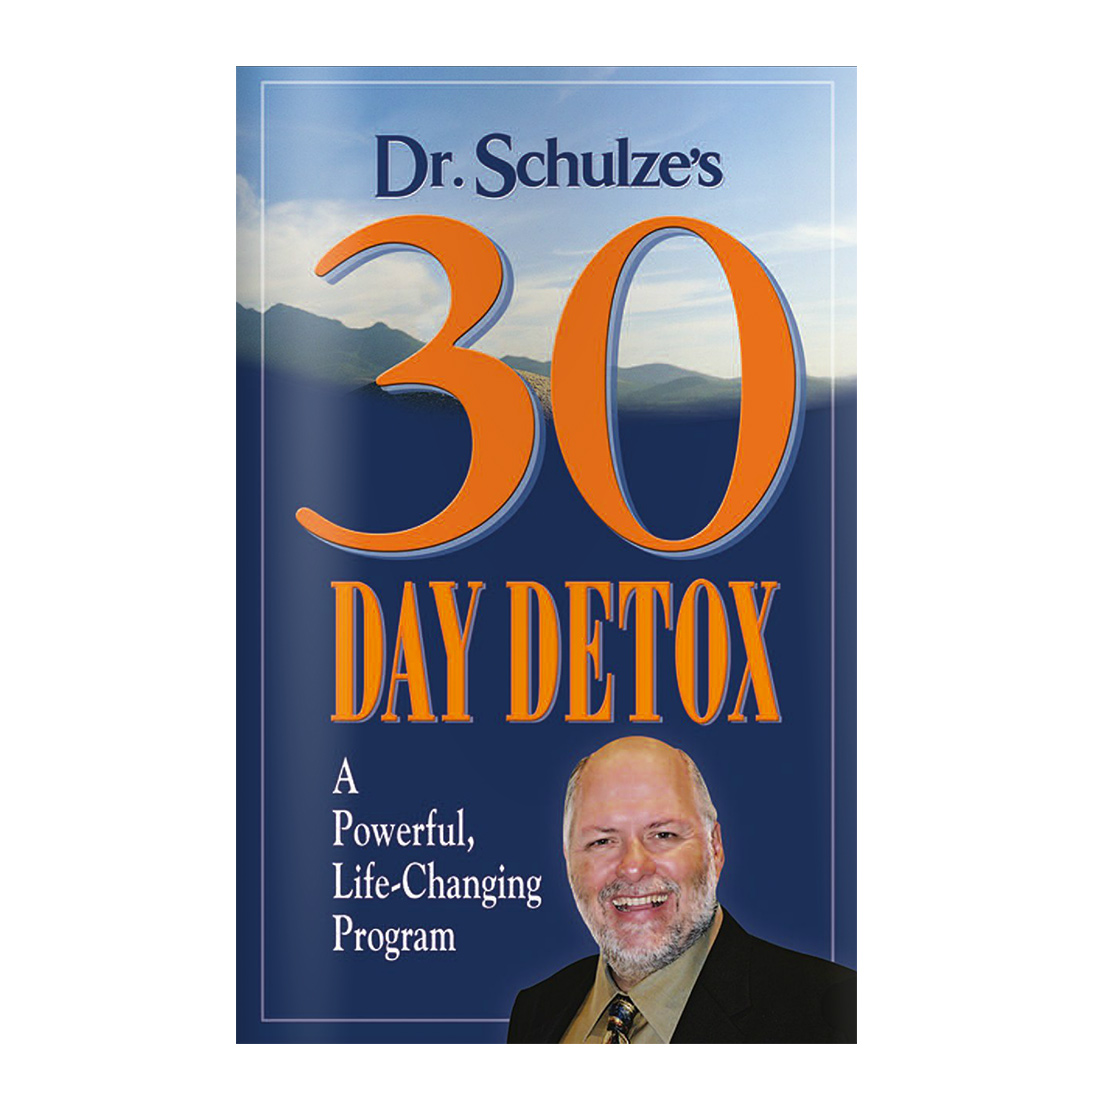 Dr. Schulze's 30 Day Detox A Powerful, Life-Changing Program